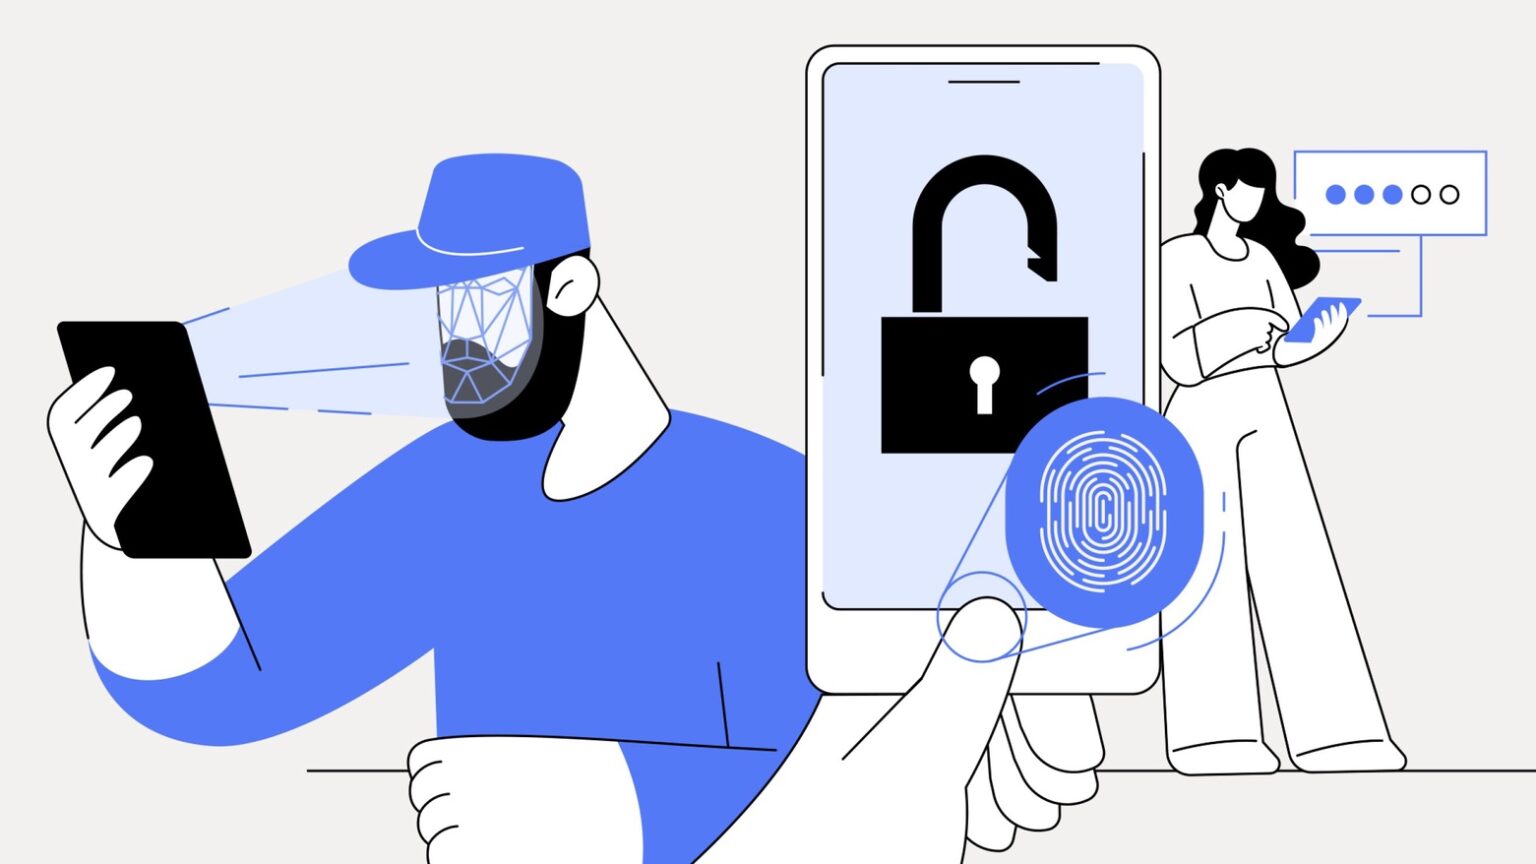 Passkeys let you use Face ID or Touch ID to sign into websites.